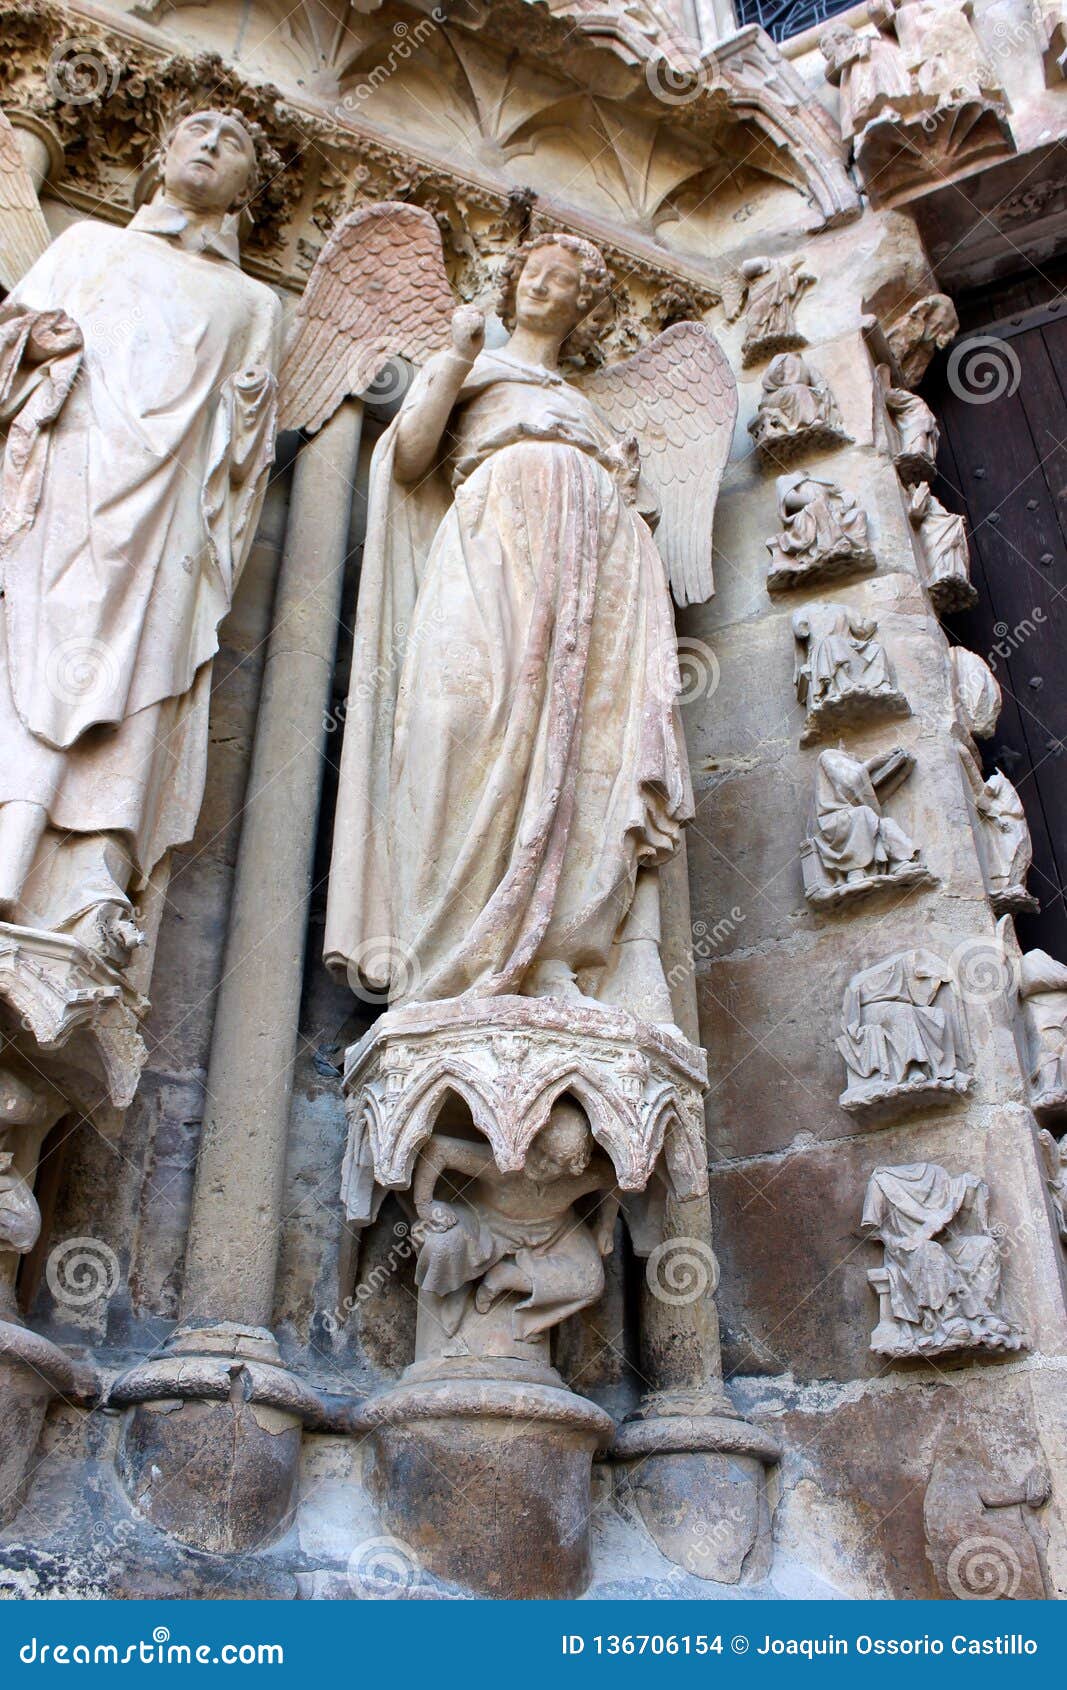 reims cathedral, france